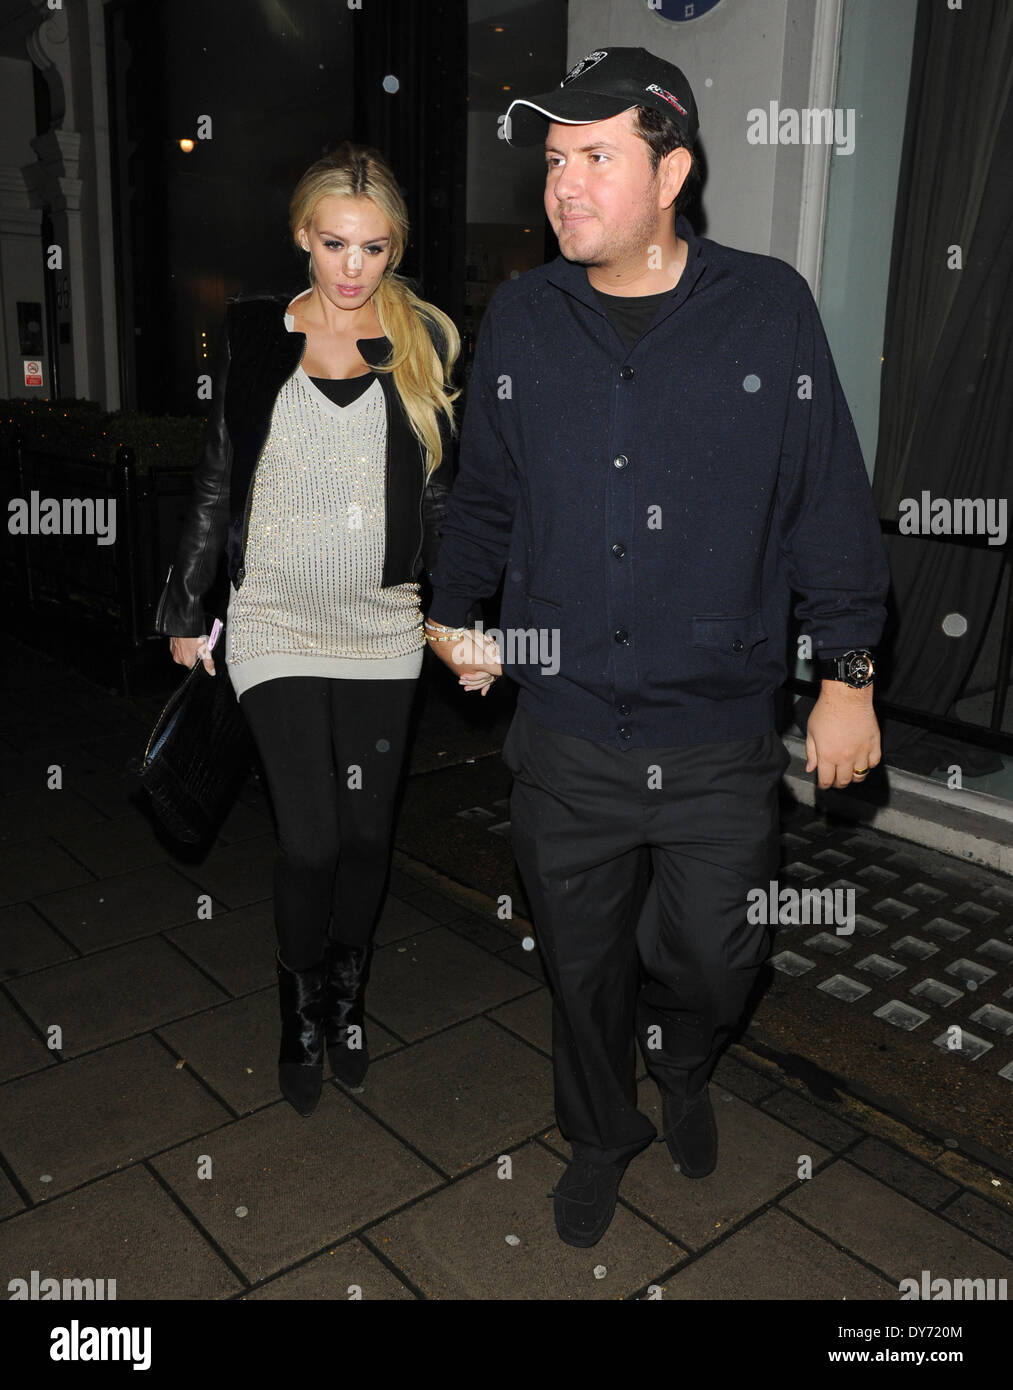 Tamara and Petra Ecclestone with their mother and partners at Kai restaurant Featuring: Petra Ecclestone,James Stunt Where: London United Kingdom When: 19 Dec 2012 Stock Photo